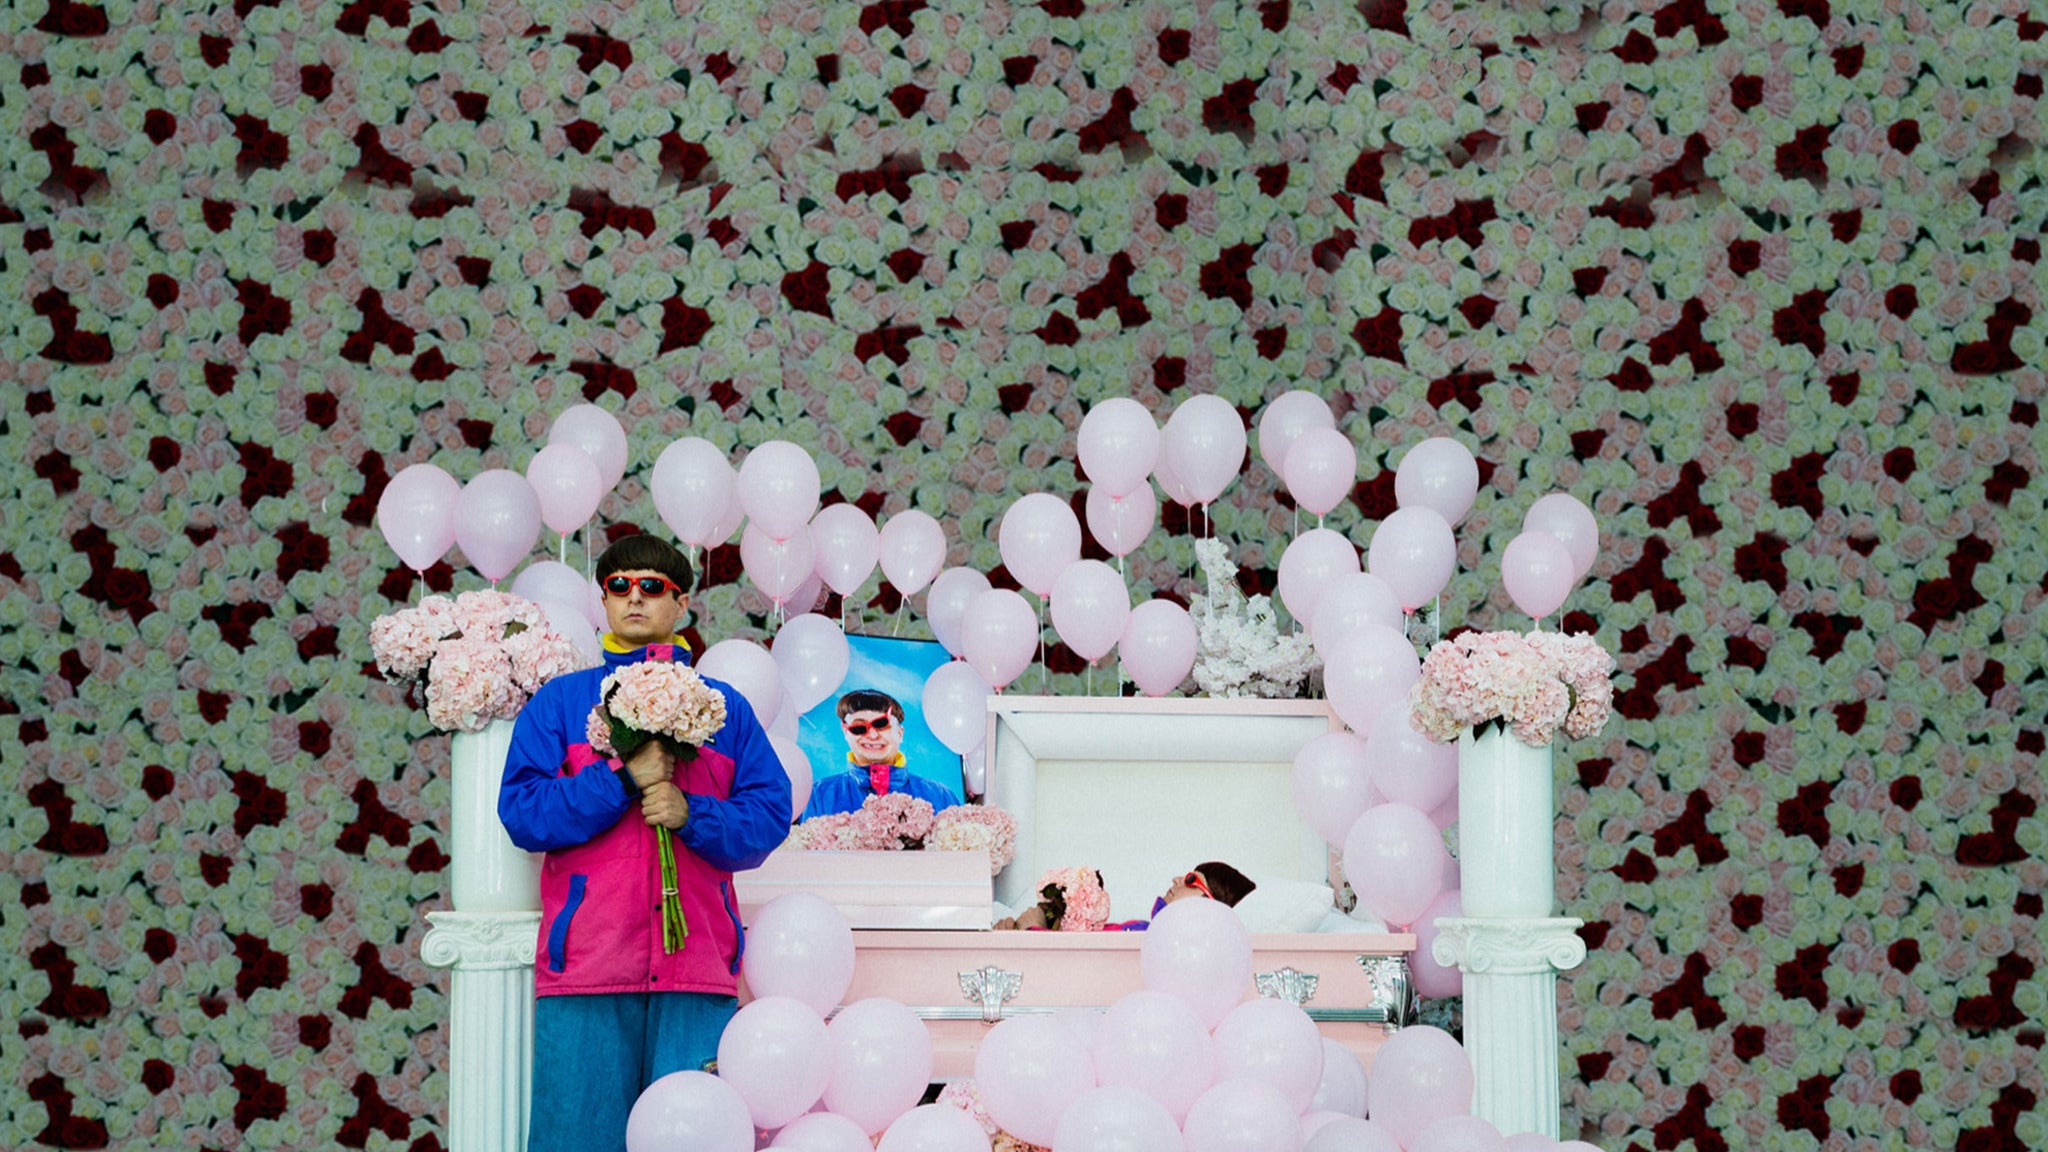 Oliver Tree - Goodbye Farewell Tour in Oakland promo photo for APE presale offer code